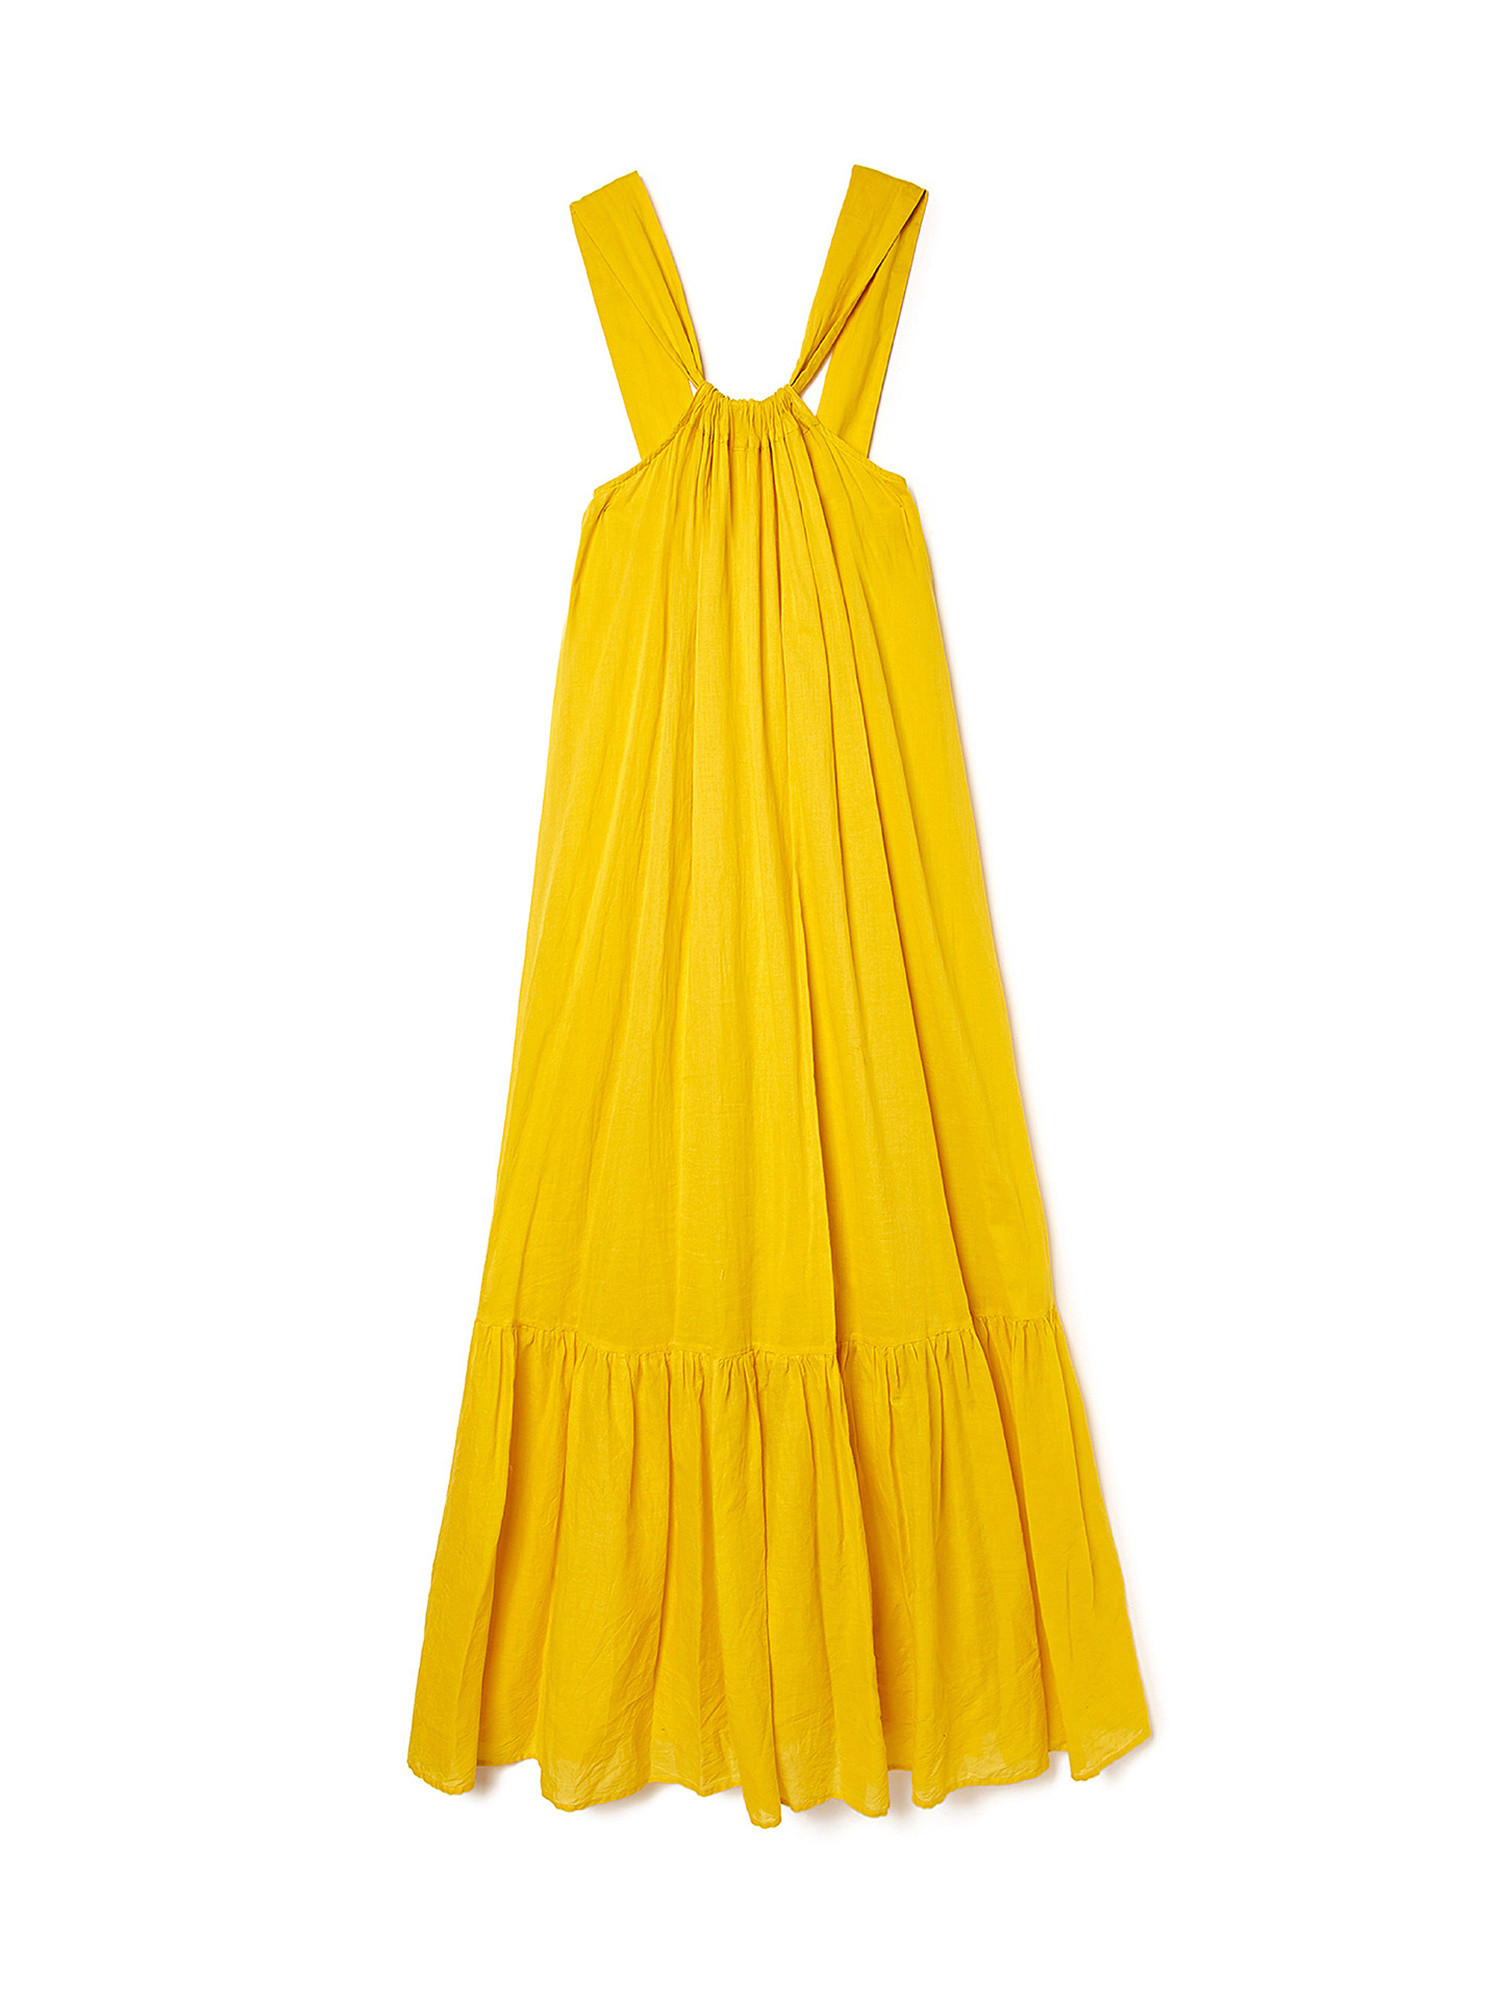 Lexington dress in cotton voile, Yellow, large image number 3